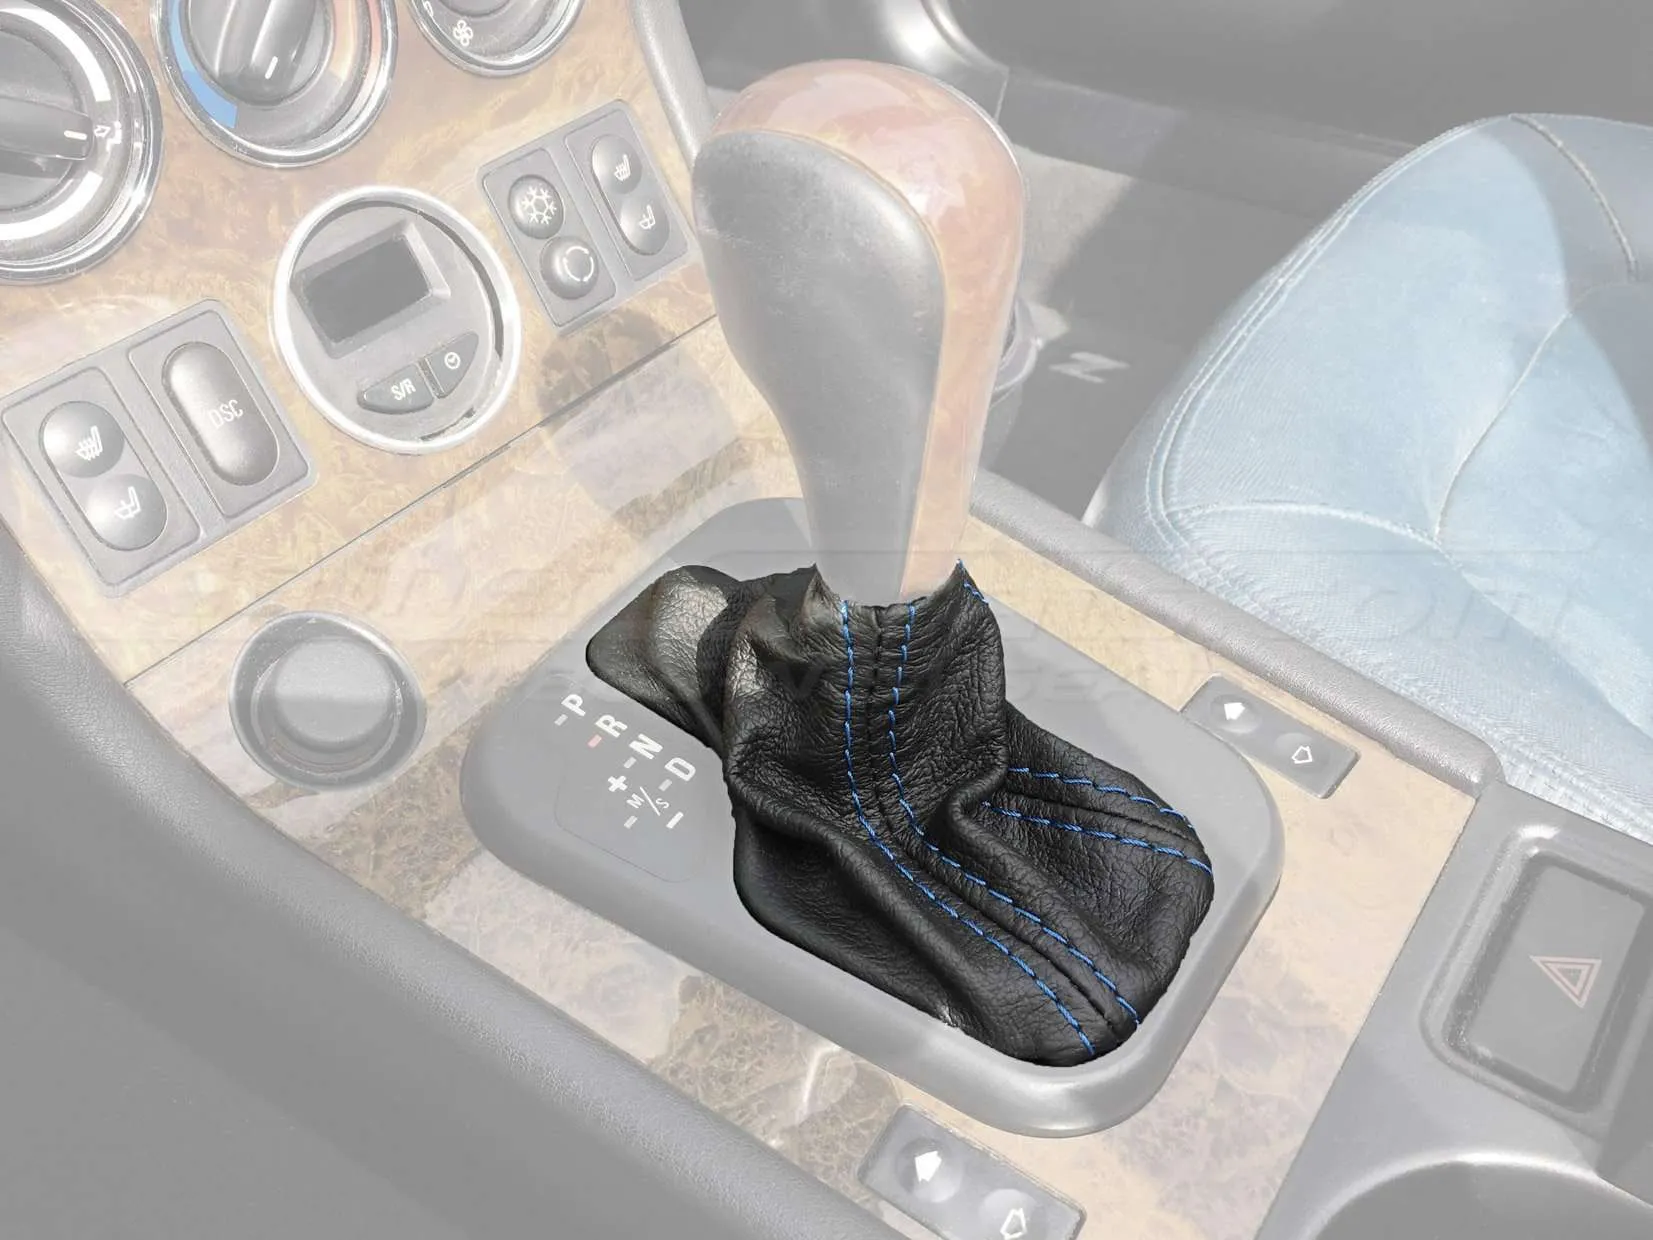 Installed shift boot upholstery for BMW Z3